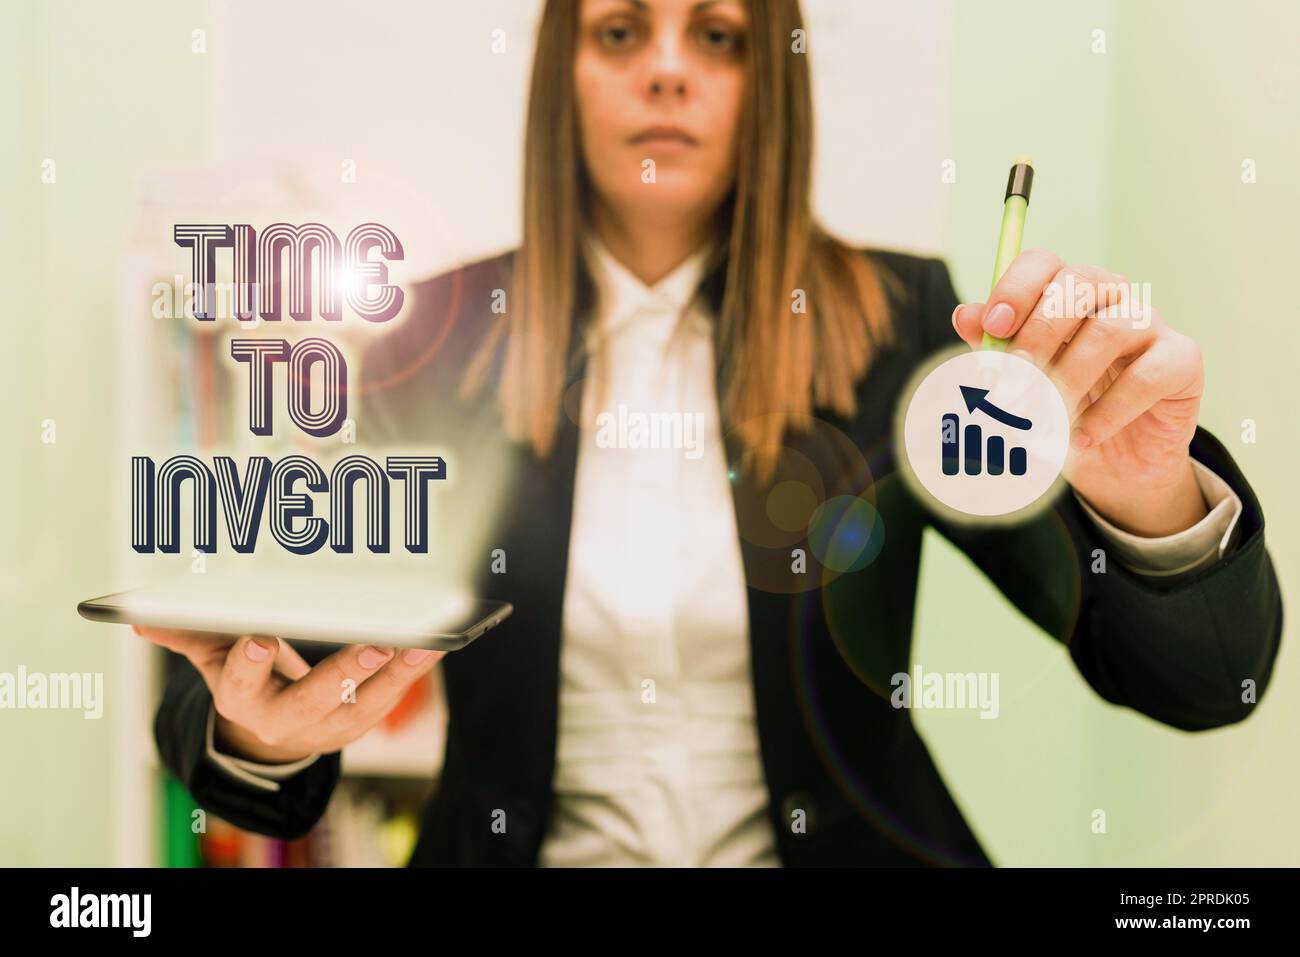 Text sign showing Time To Invent. Word Written on Invention of something new different innovation creativity Man Holding Tablet And Pen Pointing On New Ideas Inside Futuristic Frame. Stock Photo